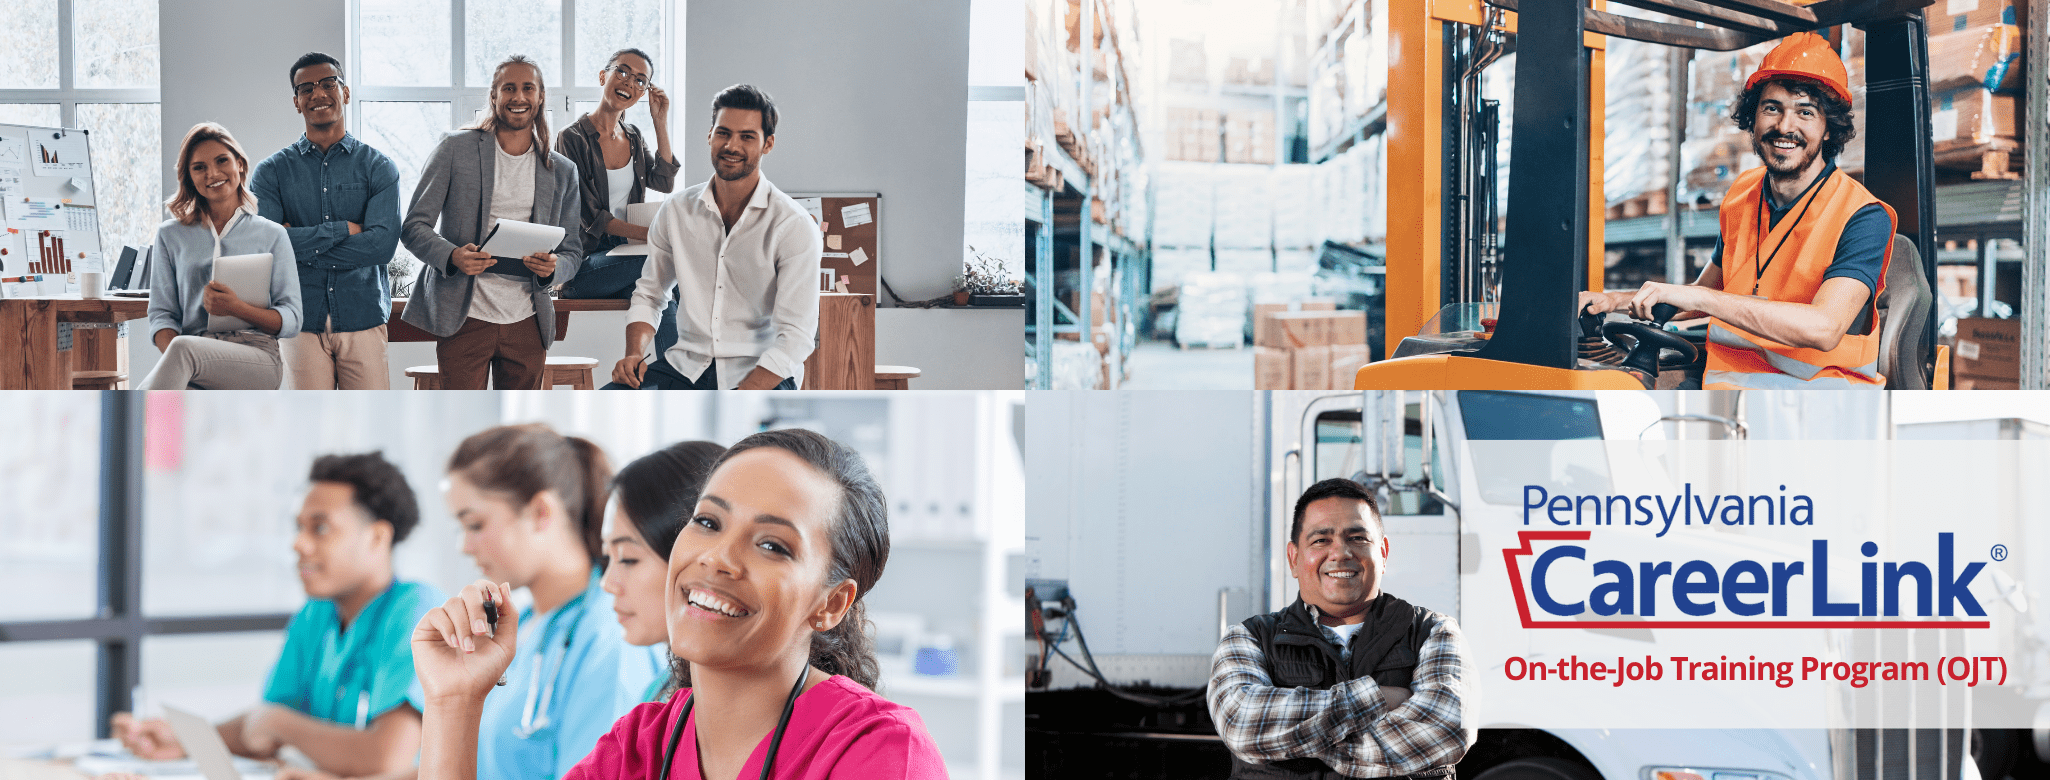 collage of four images that include a group of people in an office, a forklift driver in a warehouse, a group of nurses, and a truck driver